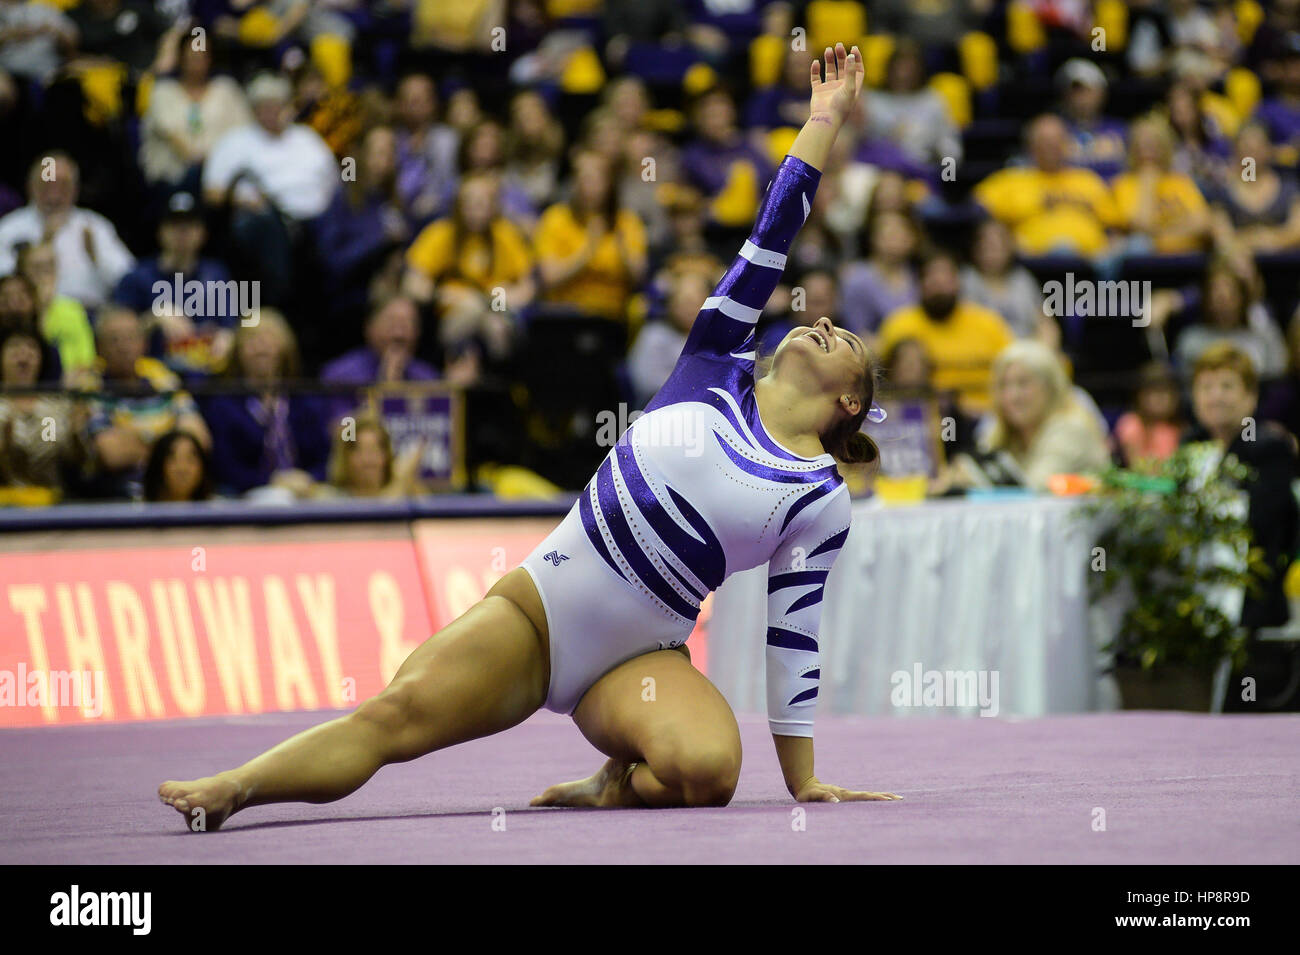 Baton Rouge, Louisiana, USA. 19th Feb, 2017. Mary Lou Retton's daughter MCKENNA KELLEY performs on the floor exercise at the Pete Maravich Assembly Center, Baton Rouge, Louisiana. Credit: Amy Sanderson/ZUMA Wire/Alamy Live News Stock Photo